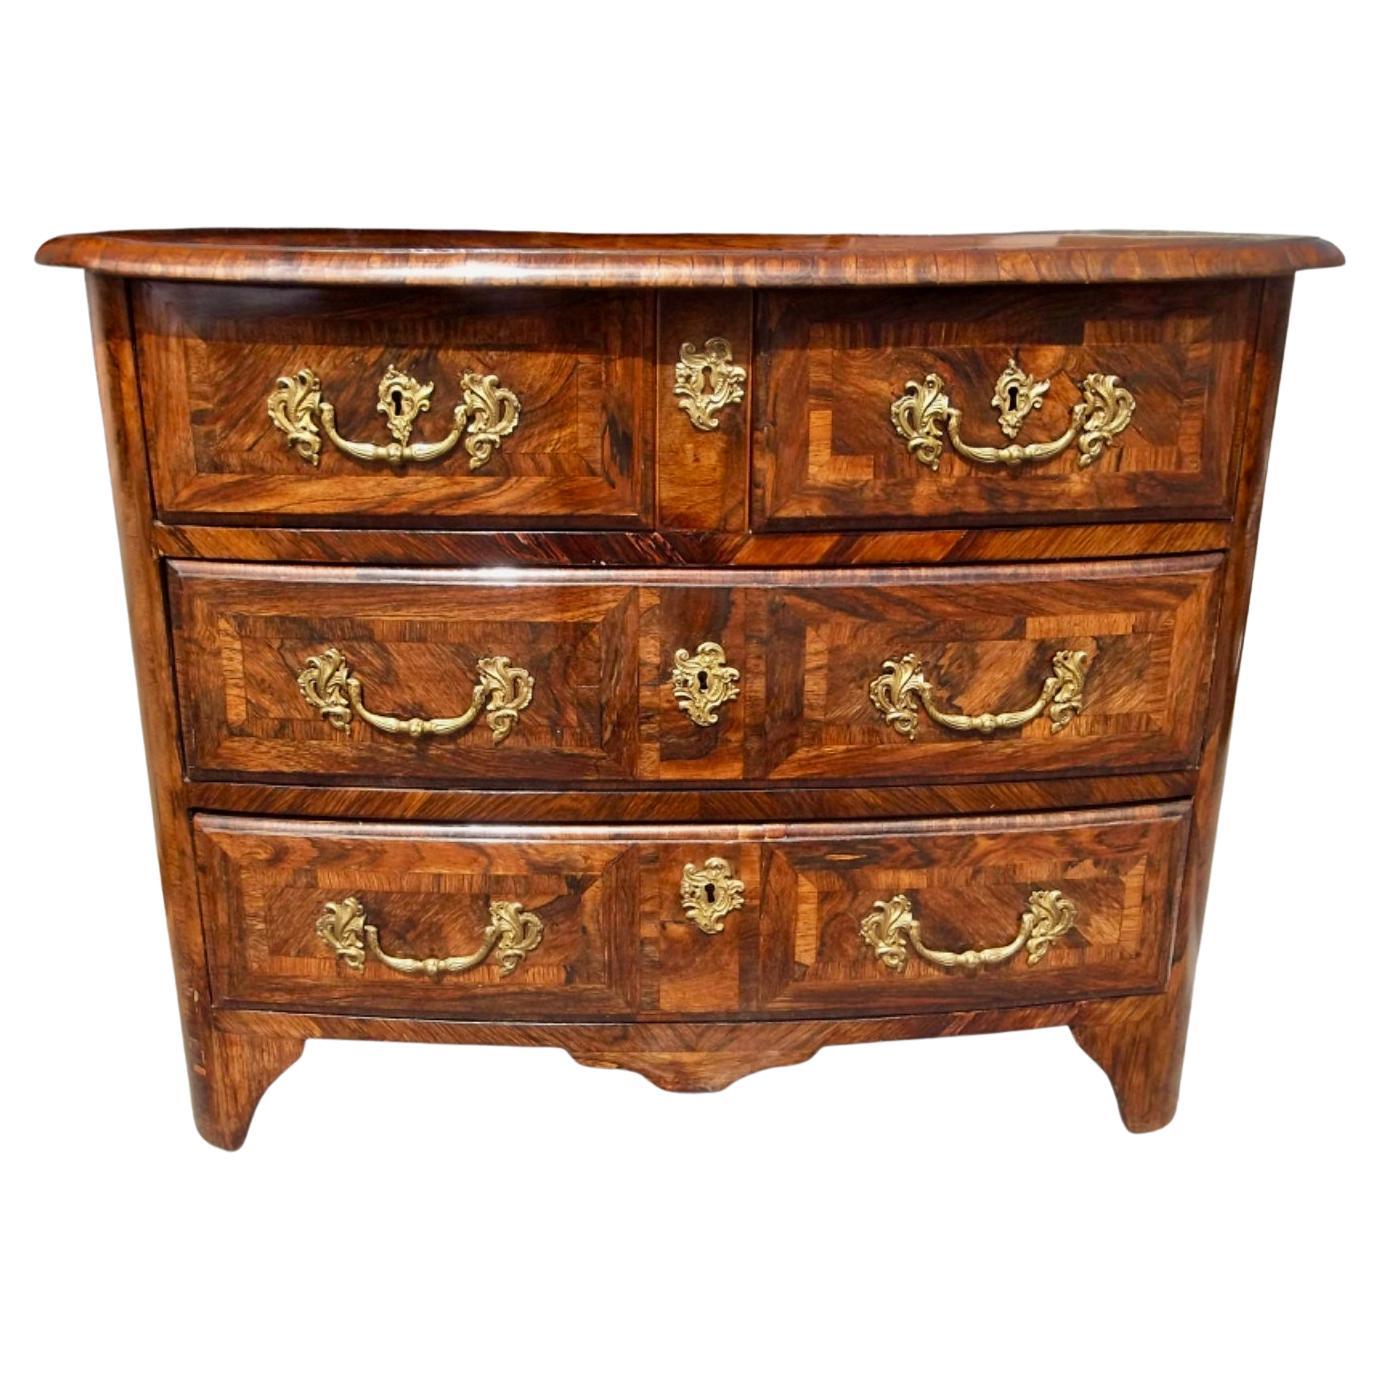 Regence Style Palisander Parquetry Inlaid Bow Front Commode For Sale